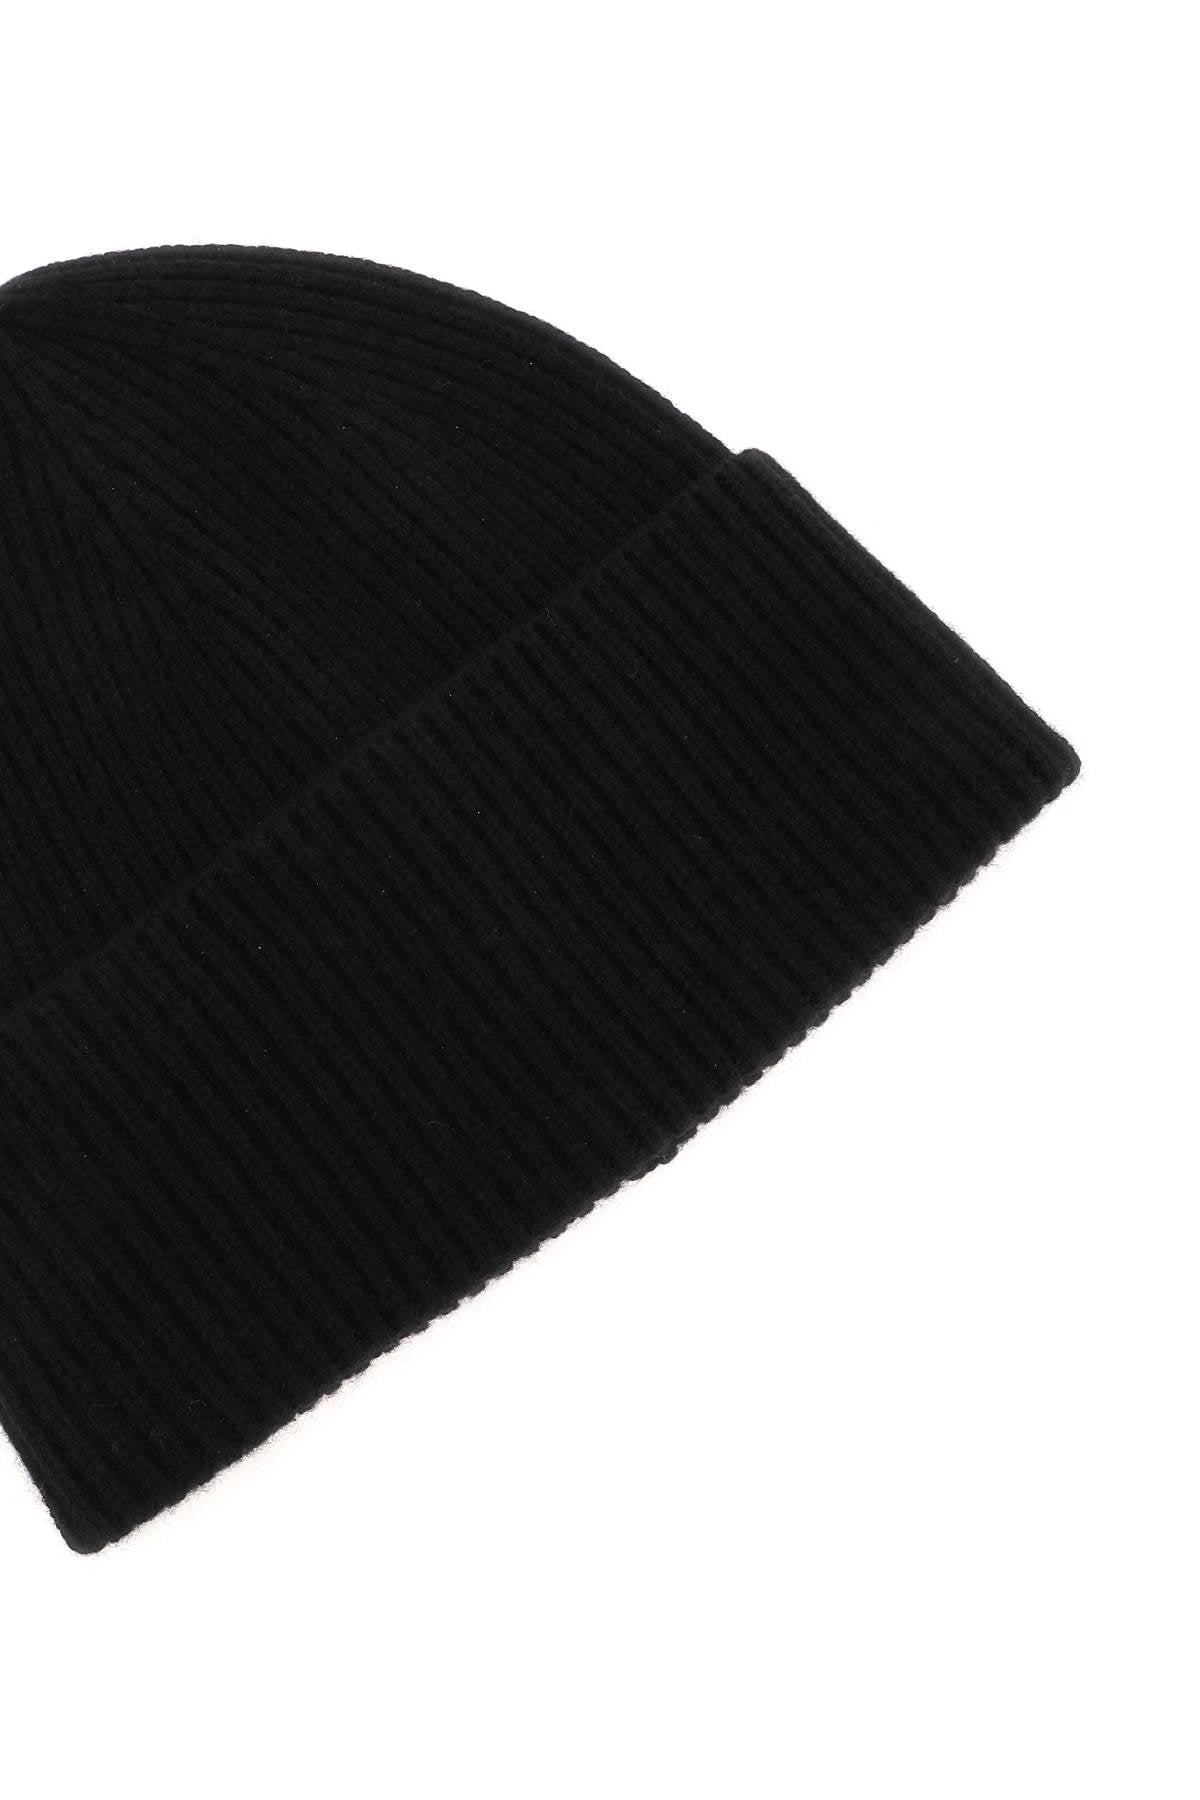 Toteme Toteme ribbed beanie hat